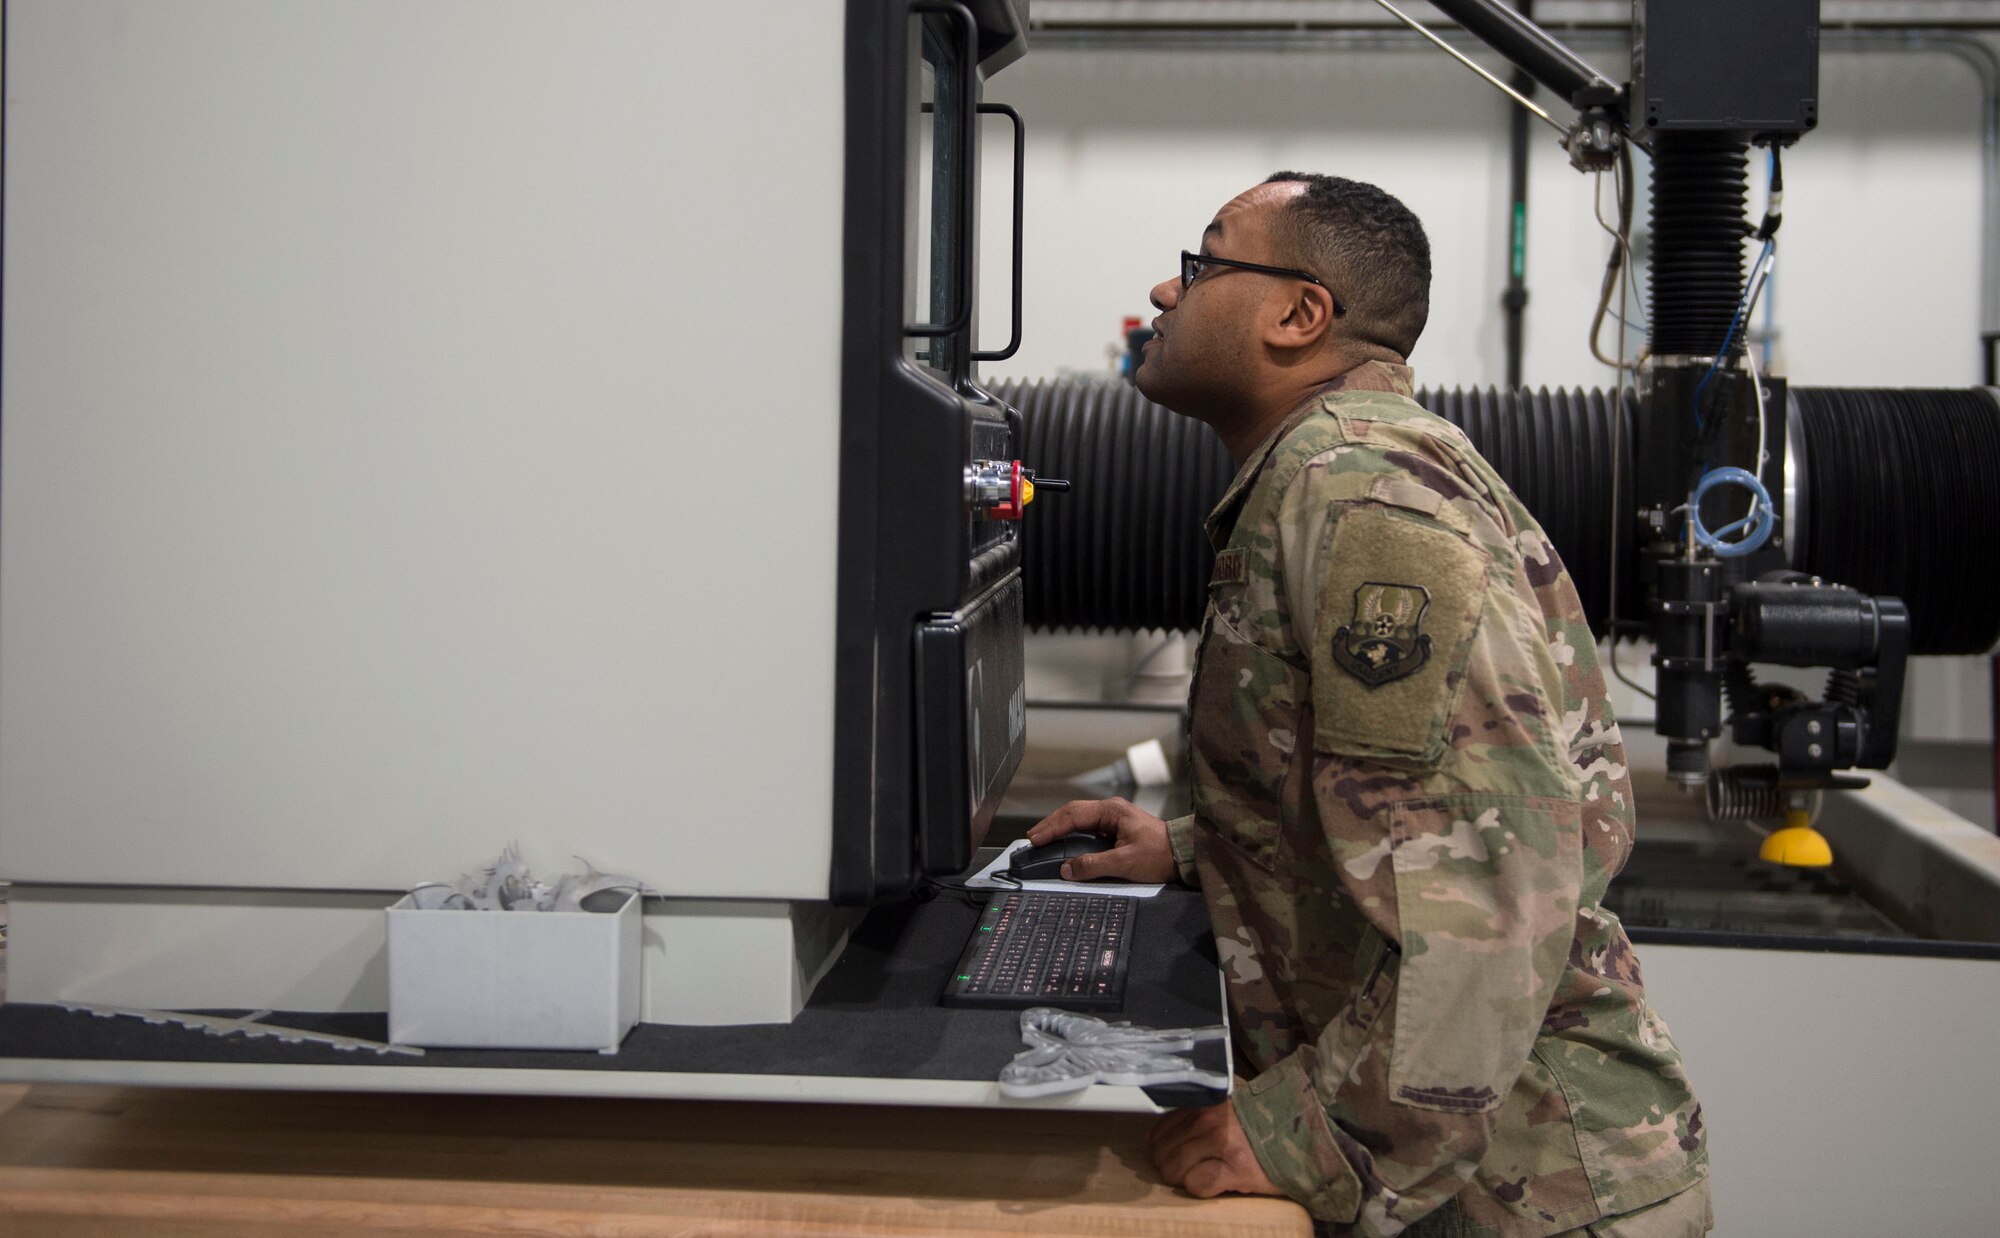 U.S. Air Force Master Sgt. Anwar Simmons, section chief with the 379th Expeditionary Maintenance Squadron, sets up the abrasive waterjet cutting machine at Al Udeid Air Base, Qatar, June 5, 2017. The abrasive waterjet cutting machine allows the airmen to create a wide range of aircraft parts or tools needed to complete the mission in an expedited and a cost effective manner. (U.S. Air Force photo by Tech. Sgt. Amy M. Lovgren)